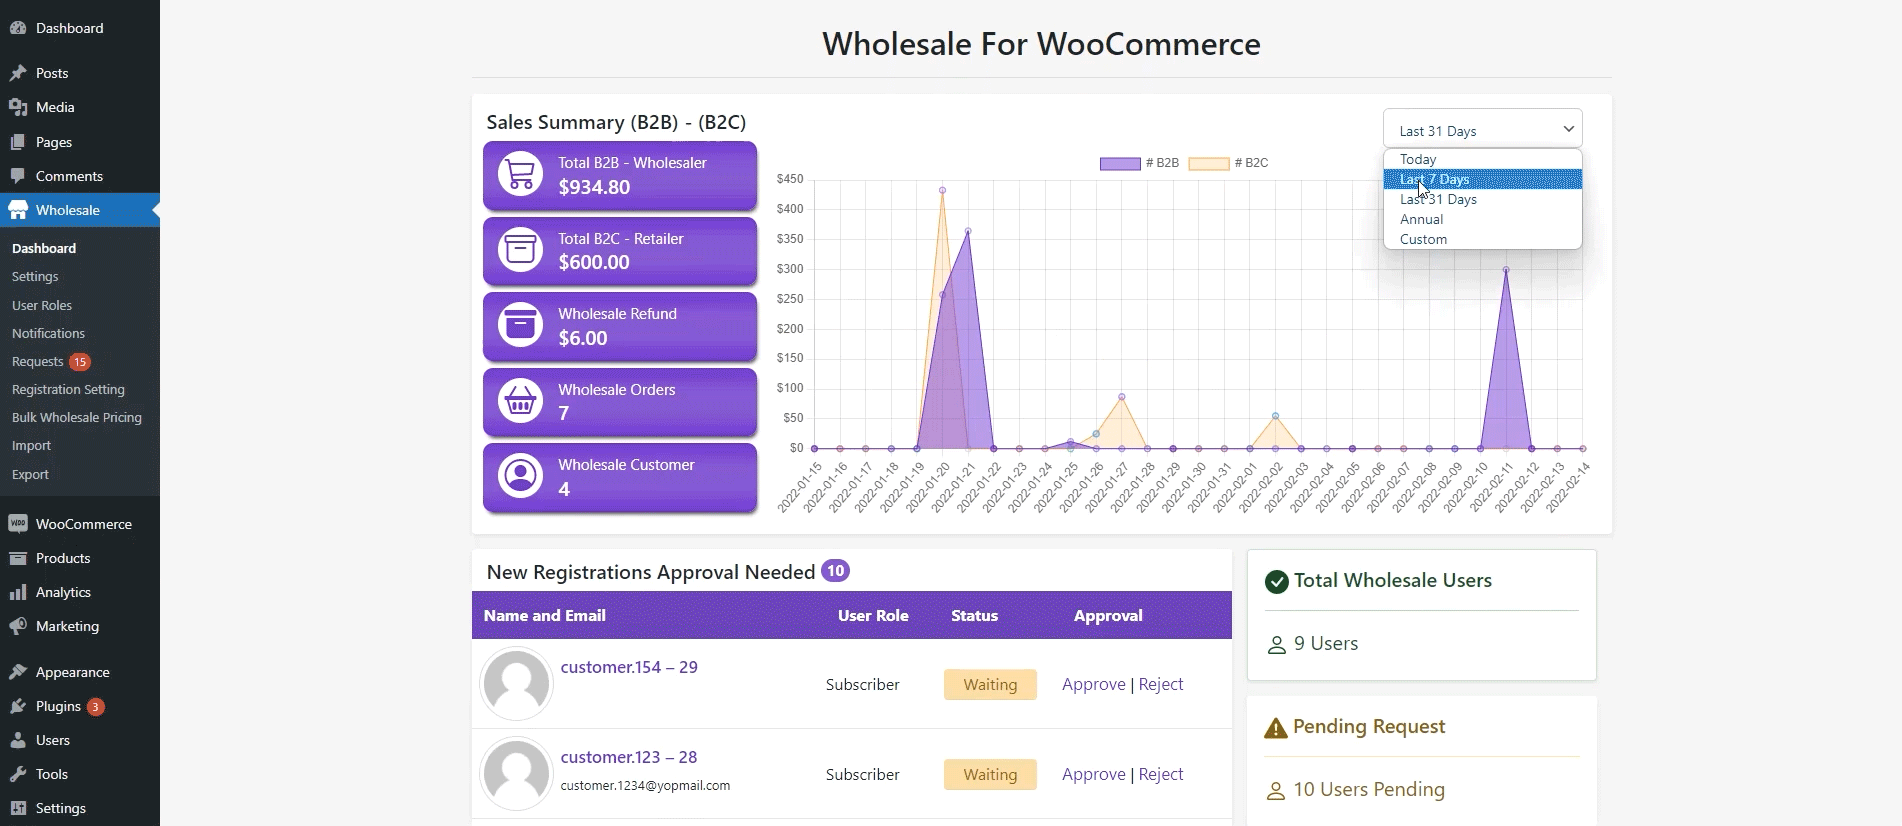 Advanced Wholesale Dashboard for Sales & Reports